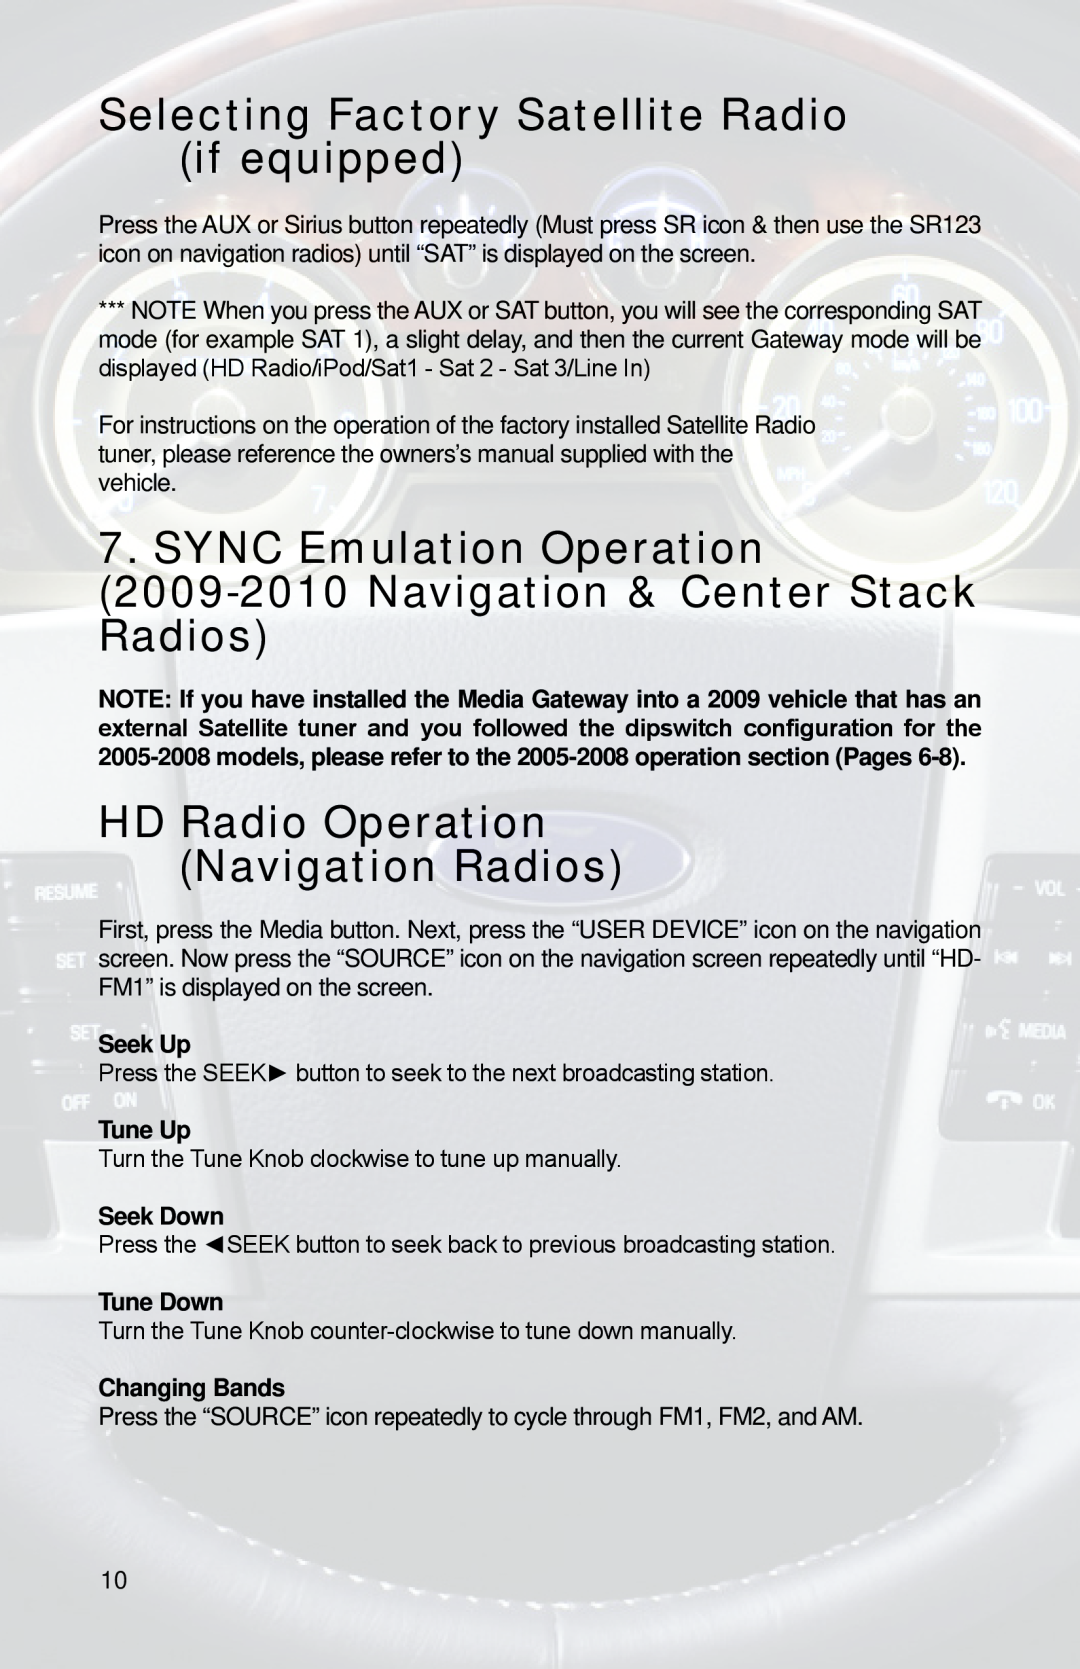 iSimple PGHFD1 Selecting Factory Satellite Radio if equipped, SYNC Emulation Operation, Seek Up, Tune Up, Seek Down 